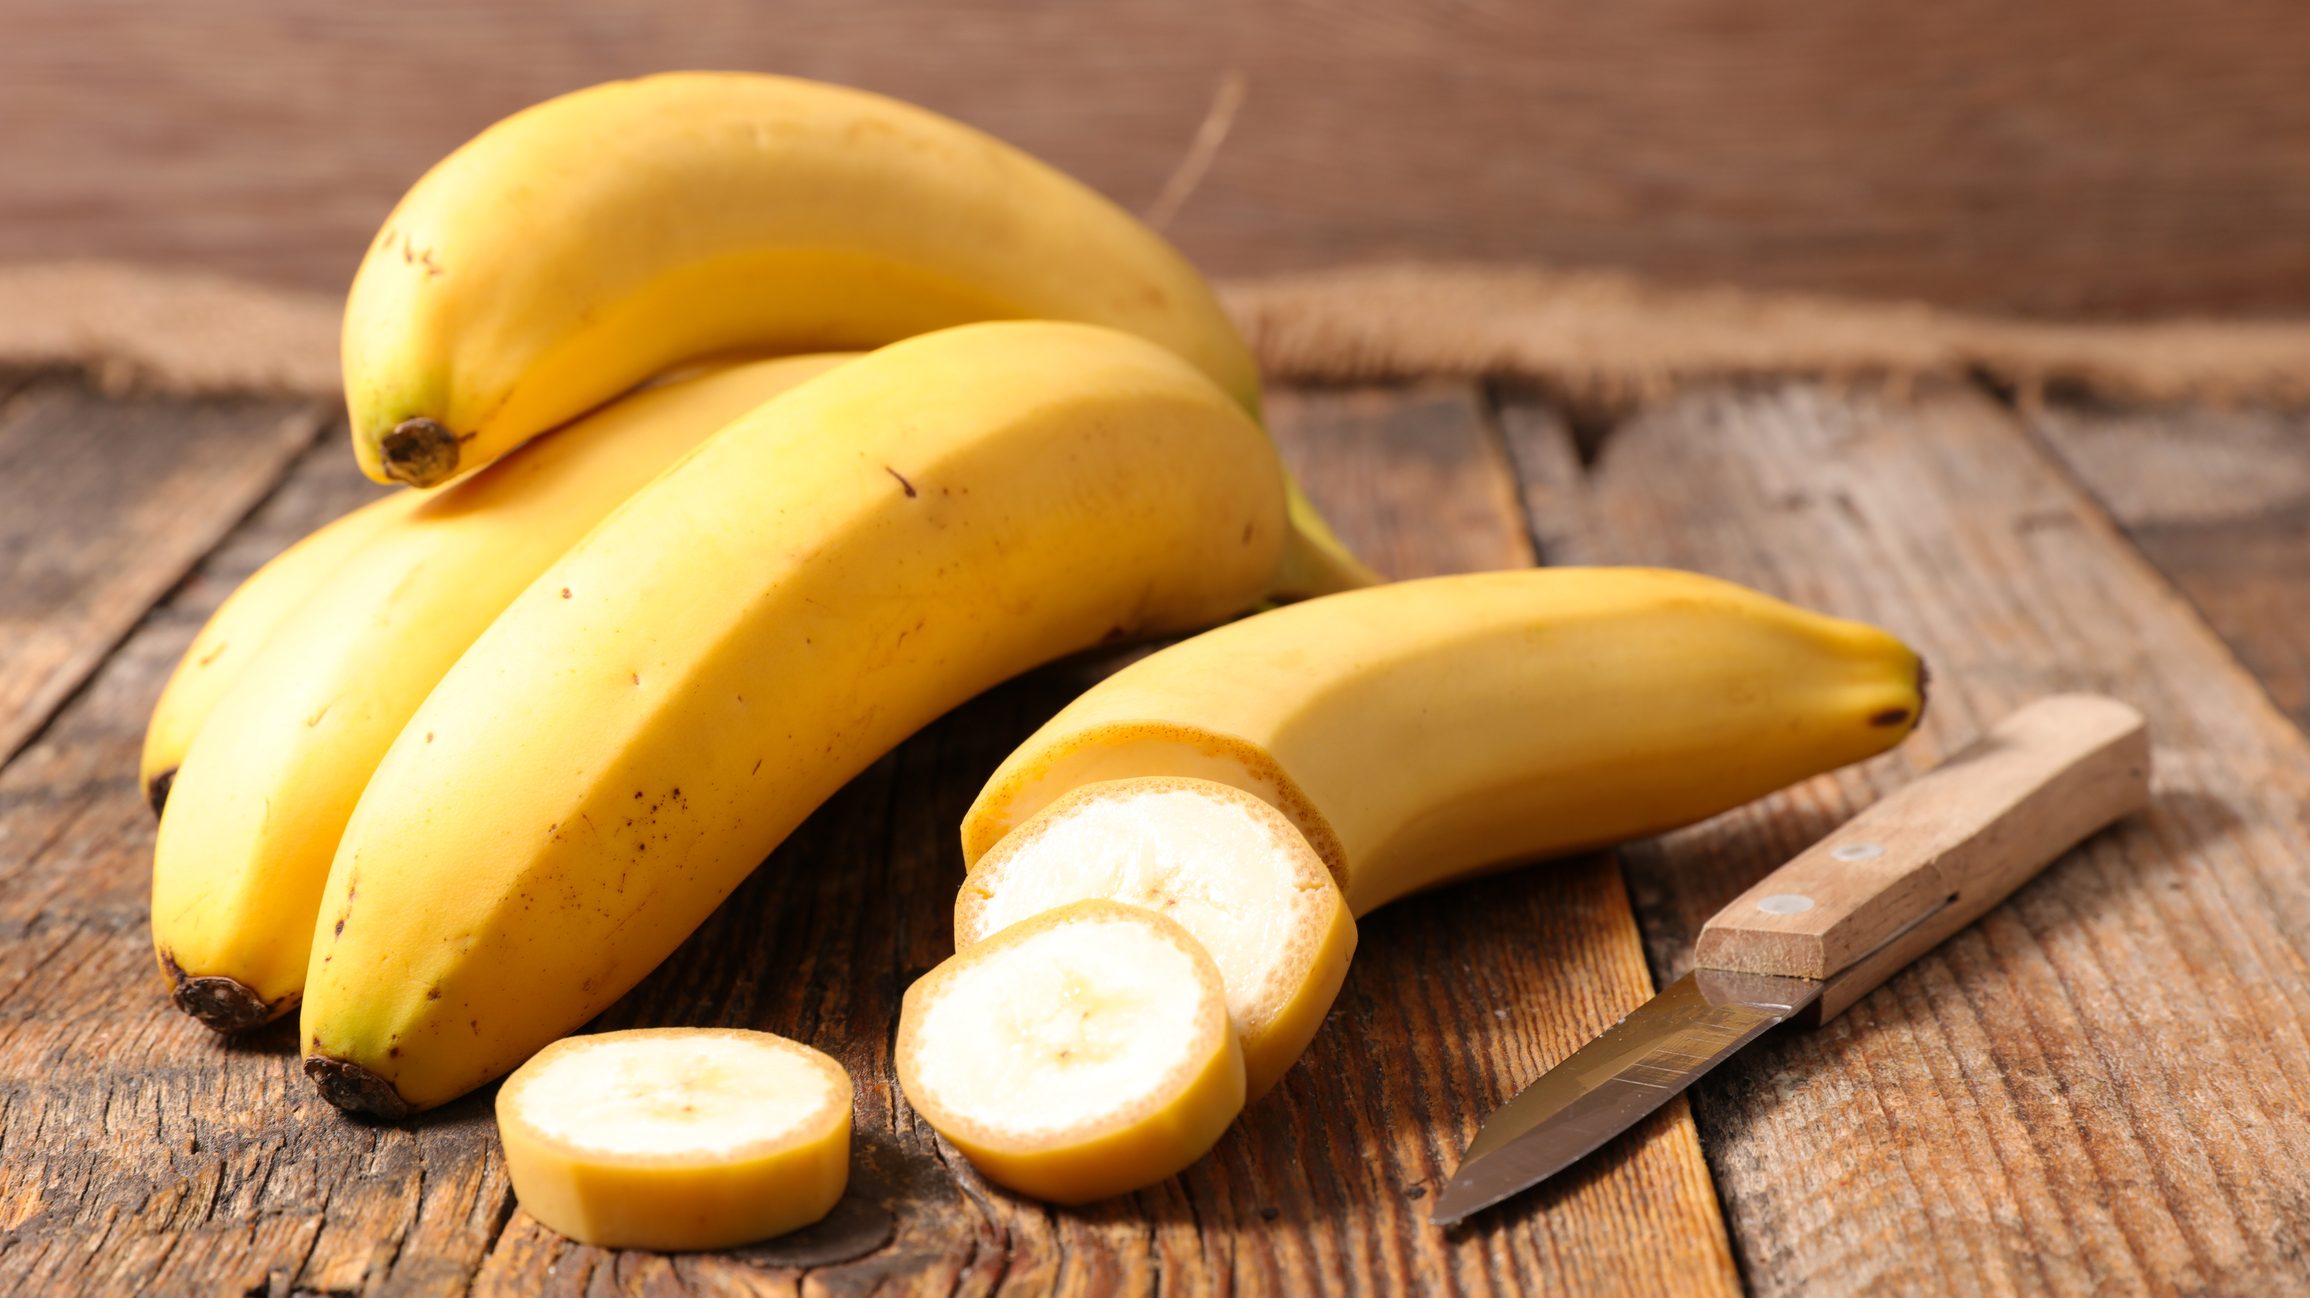 8 Rich Health Benefits Of Bananas For Men Share Your Ideas